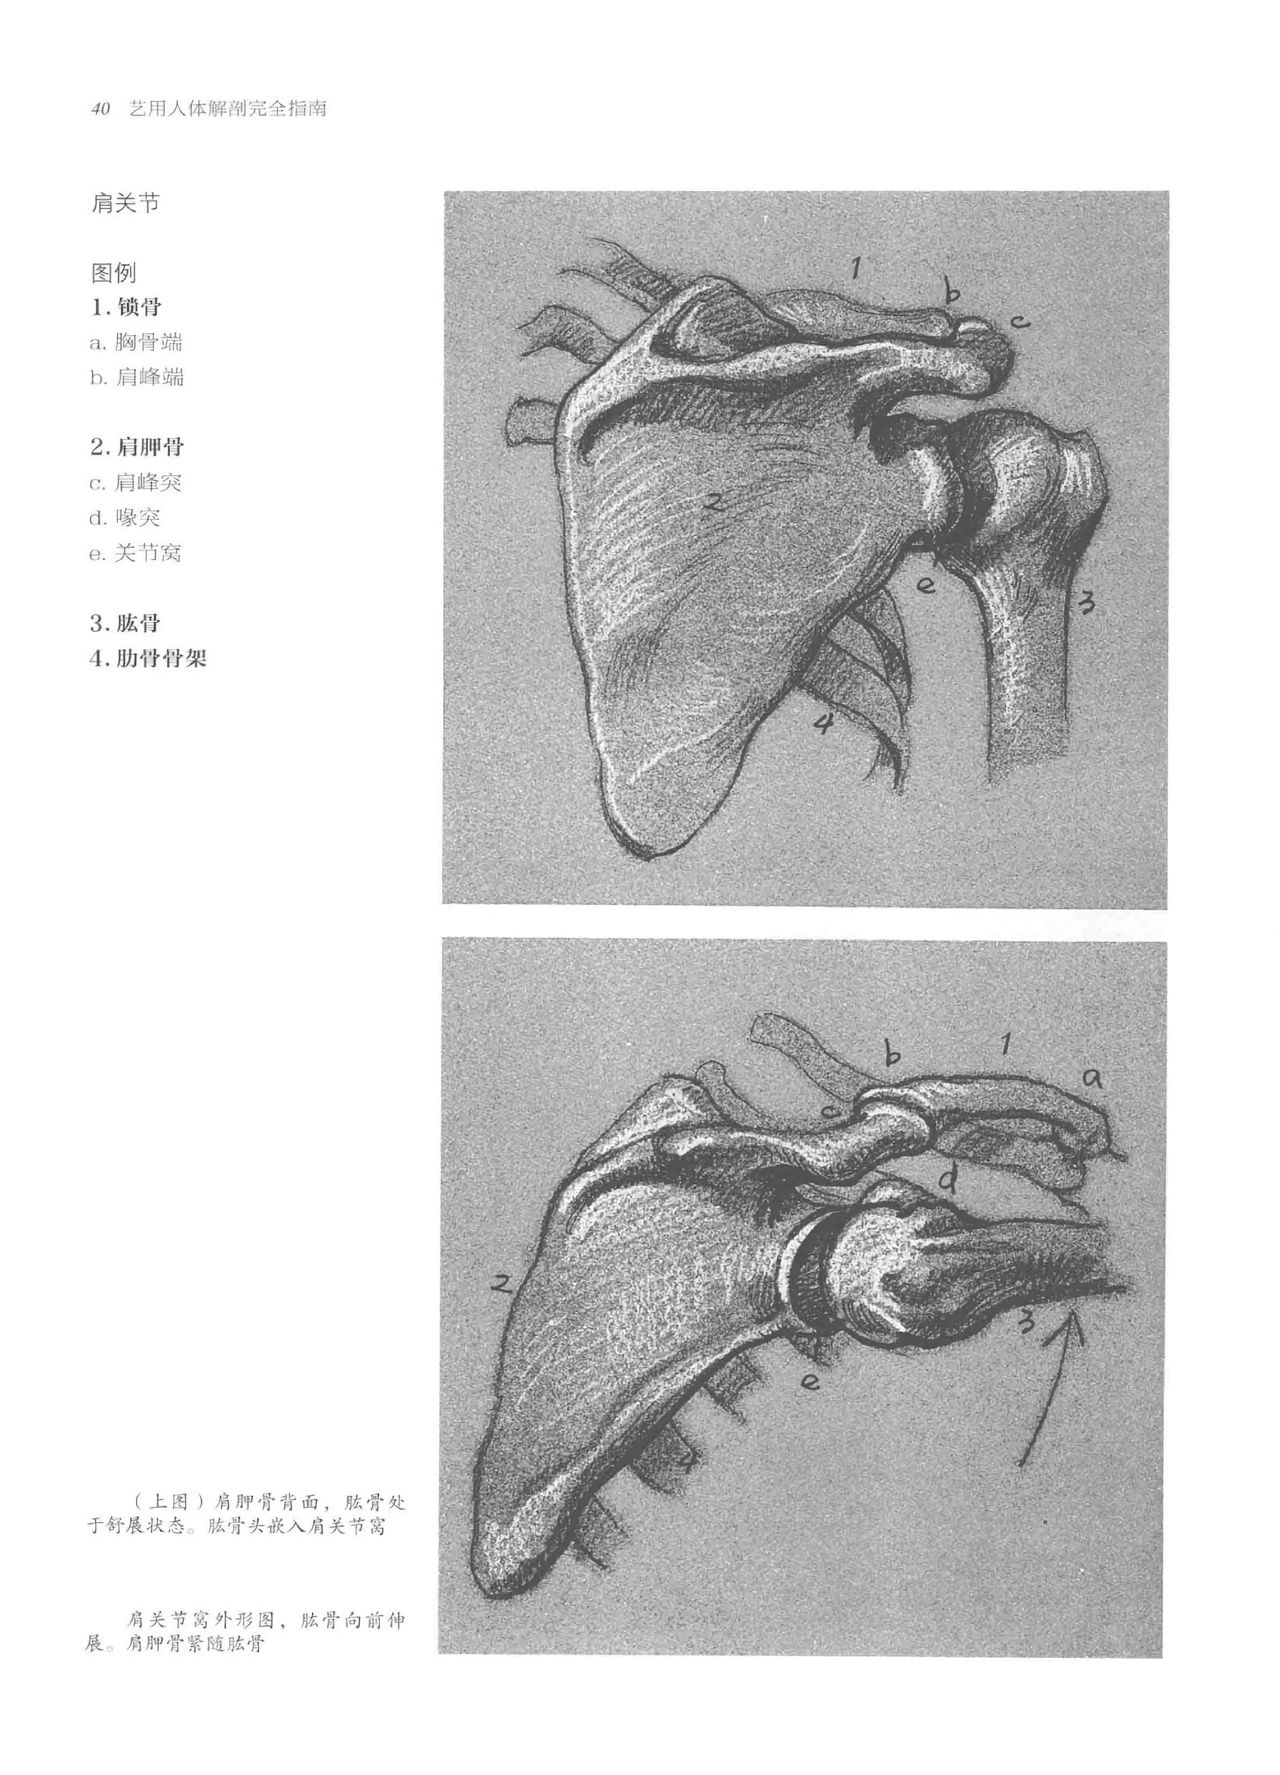 Anatomy-A Complete Guide for Artists - Joseph Sheppard [Chinese] 40